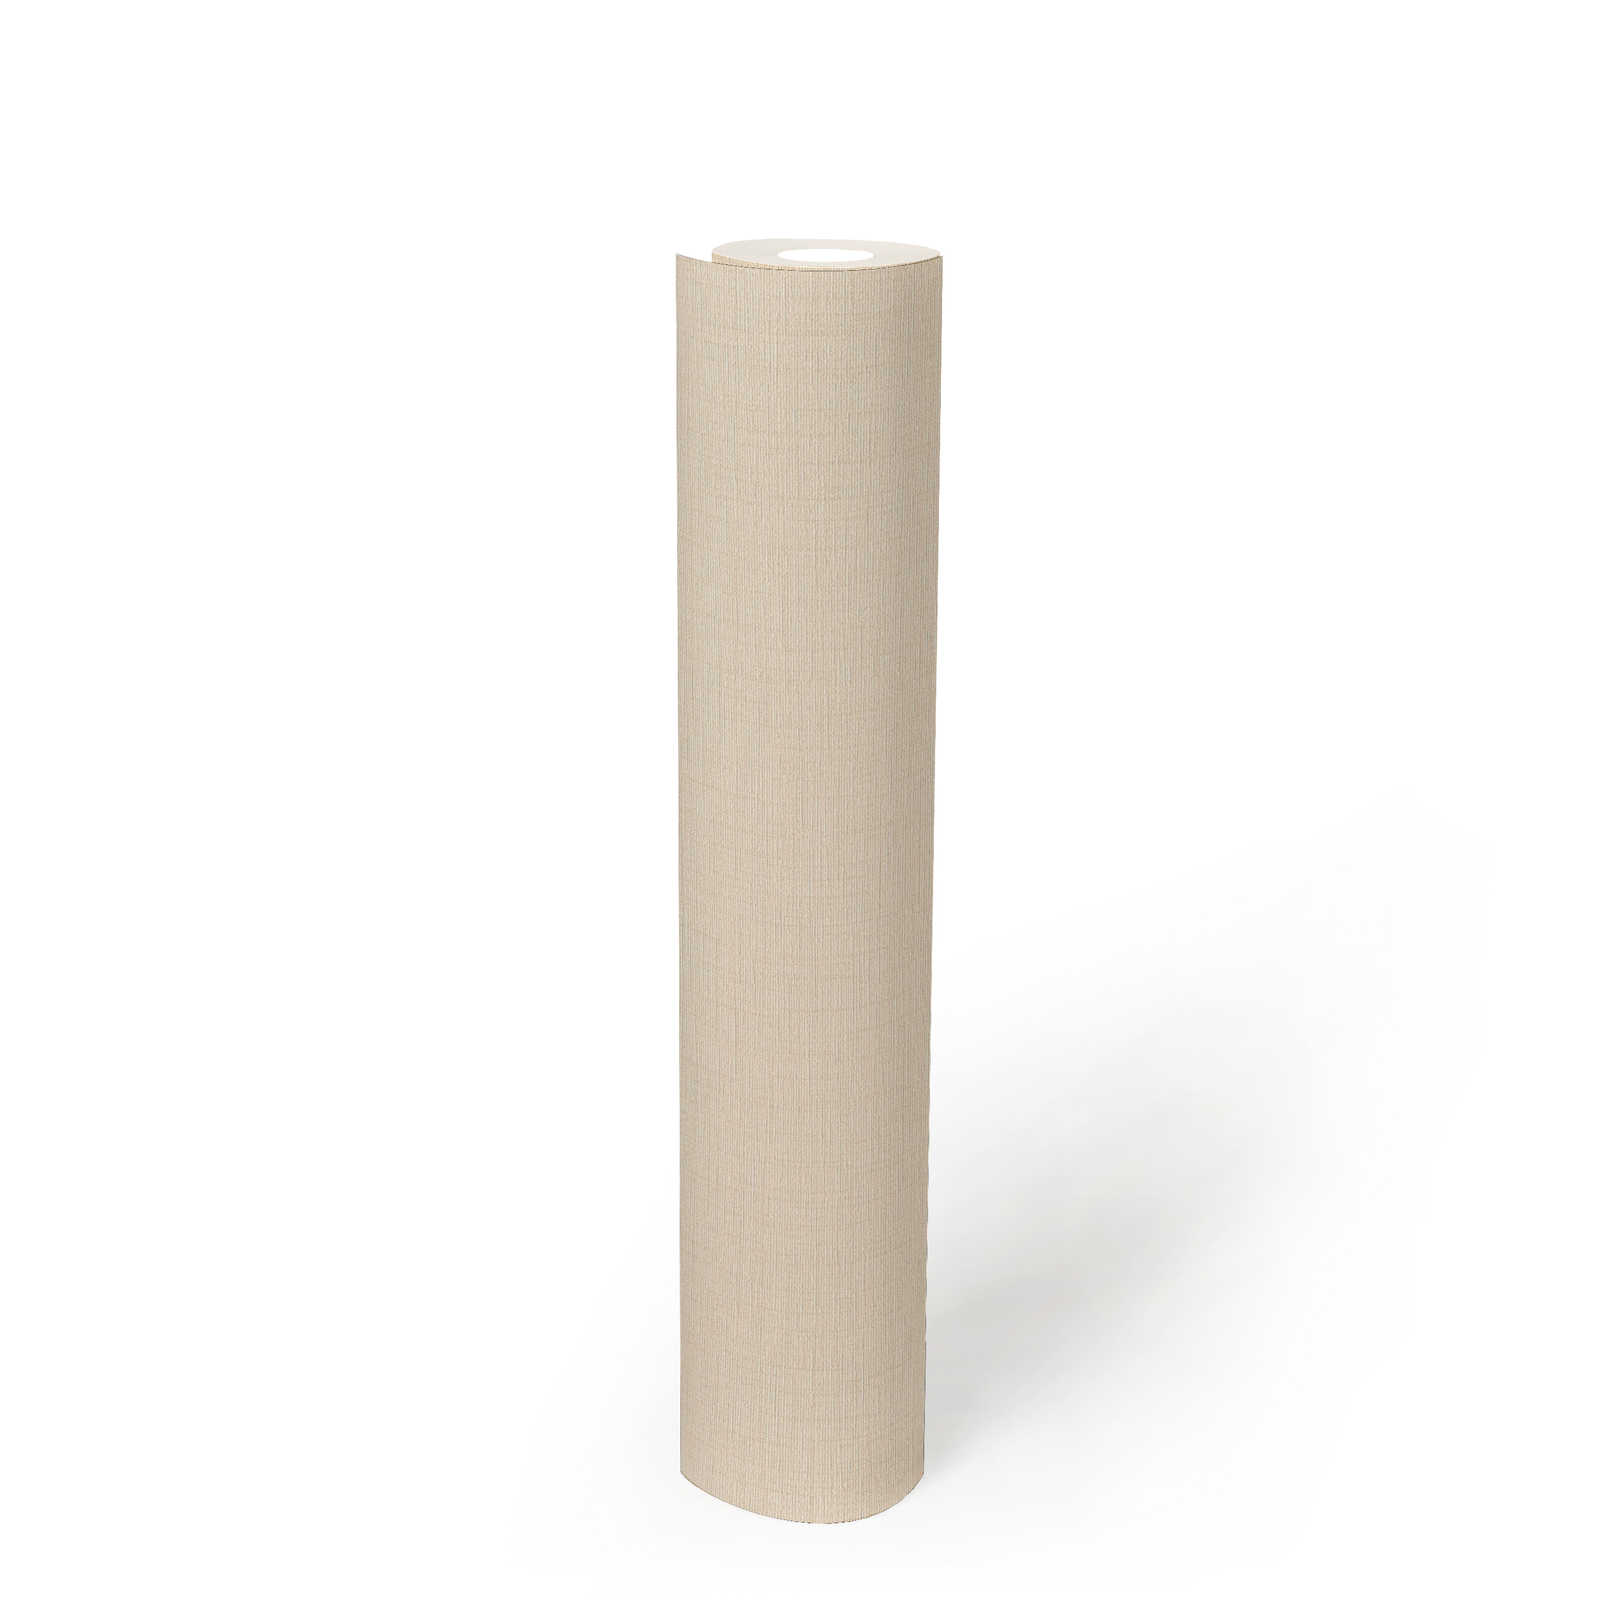             Ivory wallpaper non-woven with texture effect - cream
        